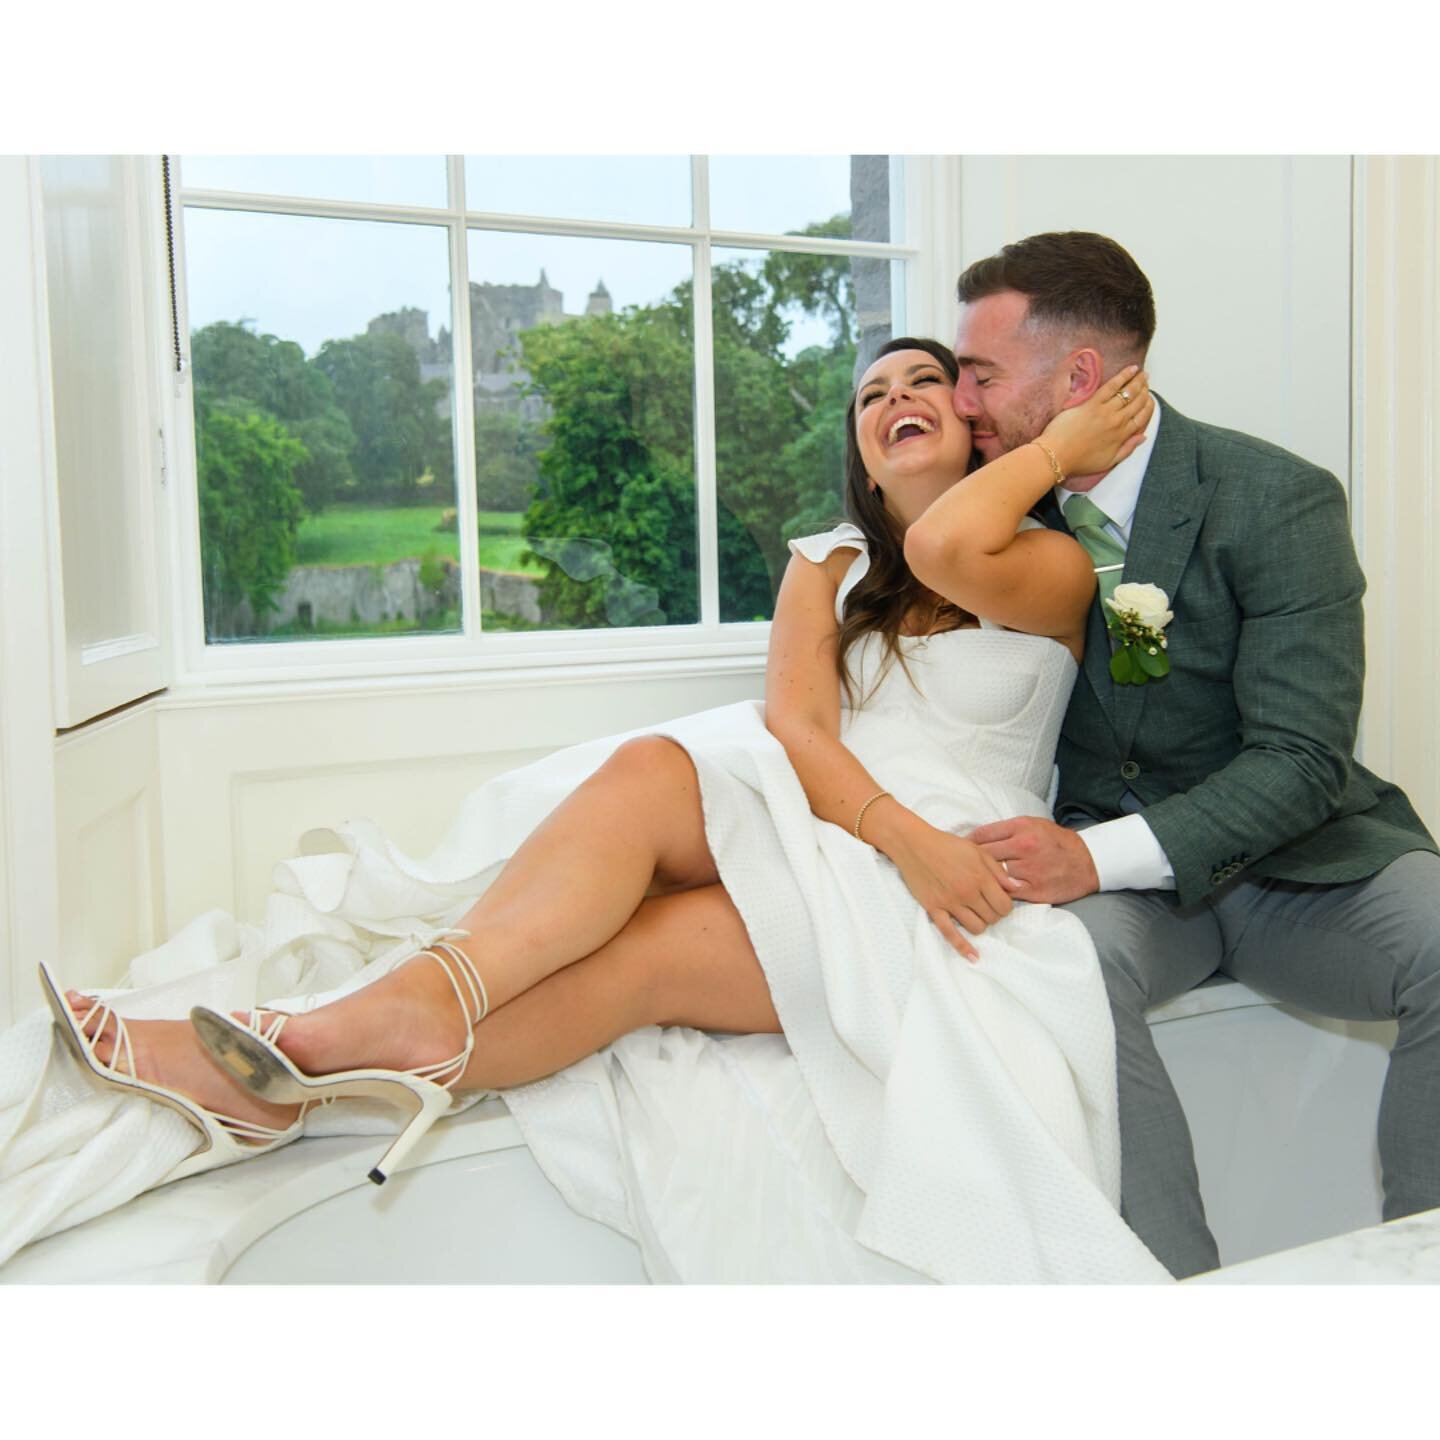 It rained all day but Fabienne &amp; JJ didn&rsquo;t care💚 

Hotel : @cashelpalace 
Makeup : @laurensextonmakeup 
Hair : @graceomeara_hair 
Flowers : @slieveardagh_blooms 
Dress : @alenaleenabridal | @ivyandwhitebride 
Shoes : @jimmychoo 
Suit : @th